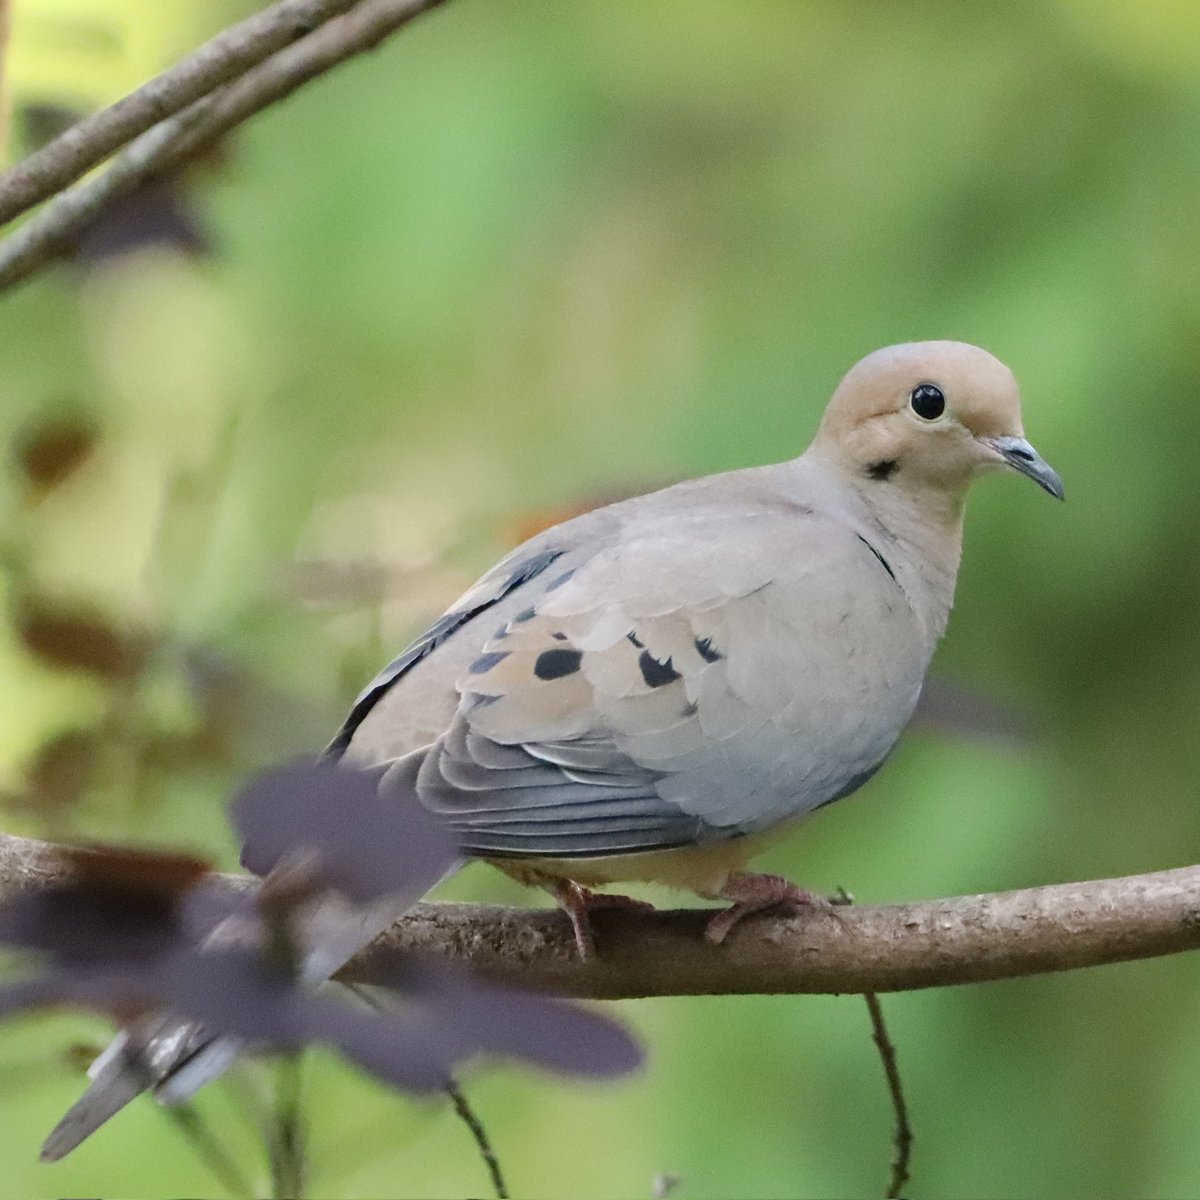 Happy Sunday from our bird world to yours!
#happysunday #birdworld #mourningdoves #mourningdove #doves #dove #birding #ohiobirdworld #birdwatchers #ohiobirdlovers #birdlovers #birdwatching #birdwatchers #birdwatchersdaily